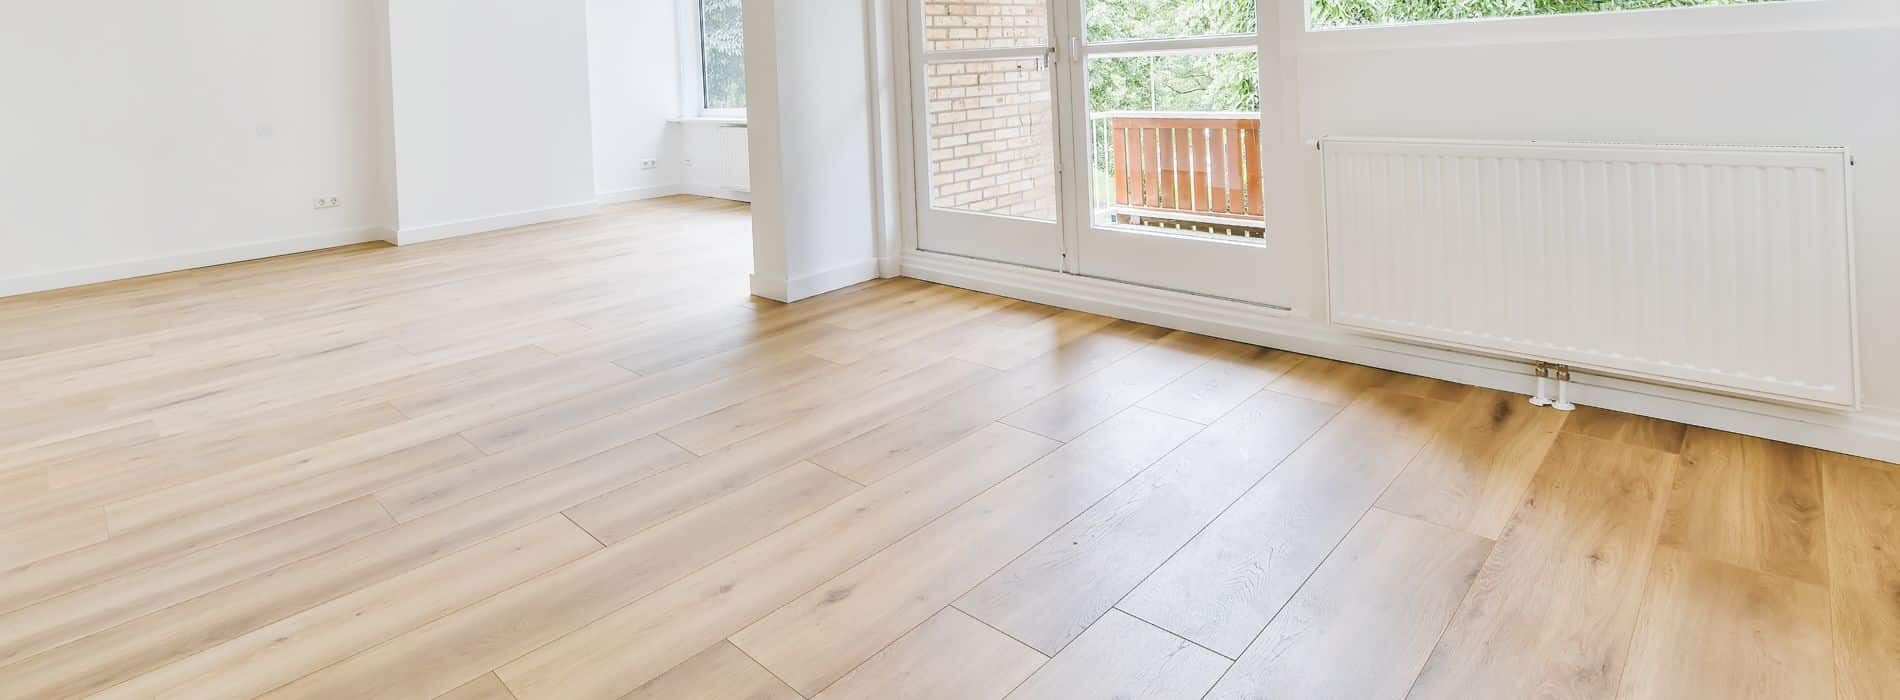 Expertly restored parquet floor in Surrey Docks, SE16, with Bona 2.5K Frost whitewashing, Traffic HD matte lacquer. Durable, stunning finish for long-lasting beauty.